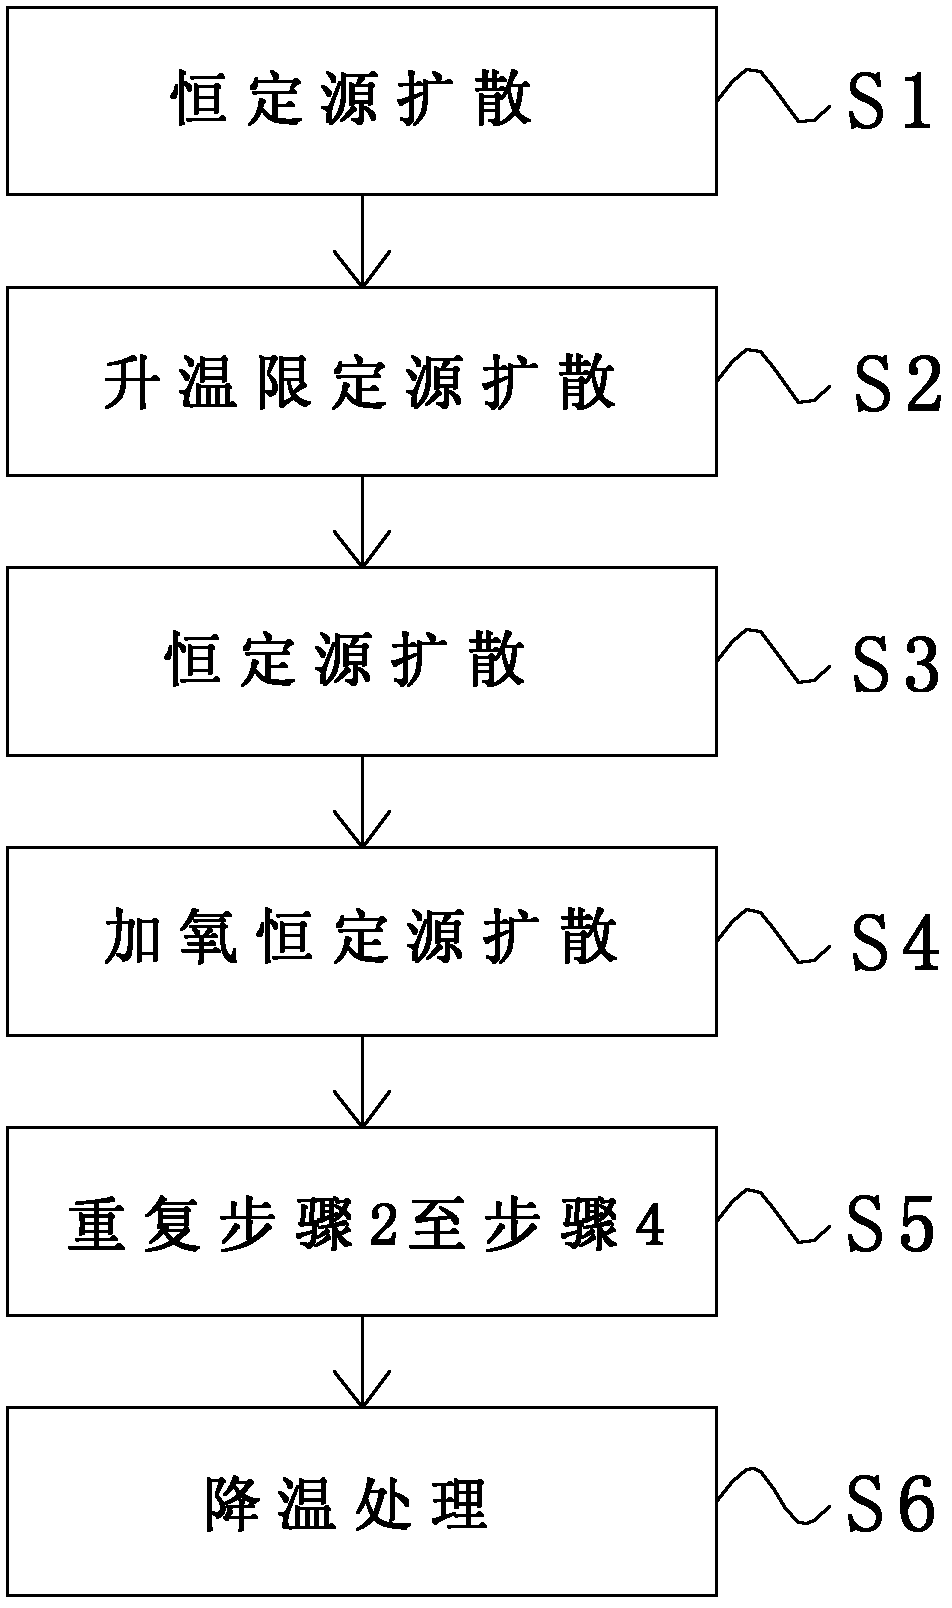 Multi-diffusion manufacturing method for polycrystalline silicon wafer